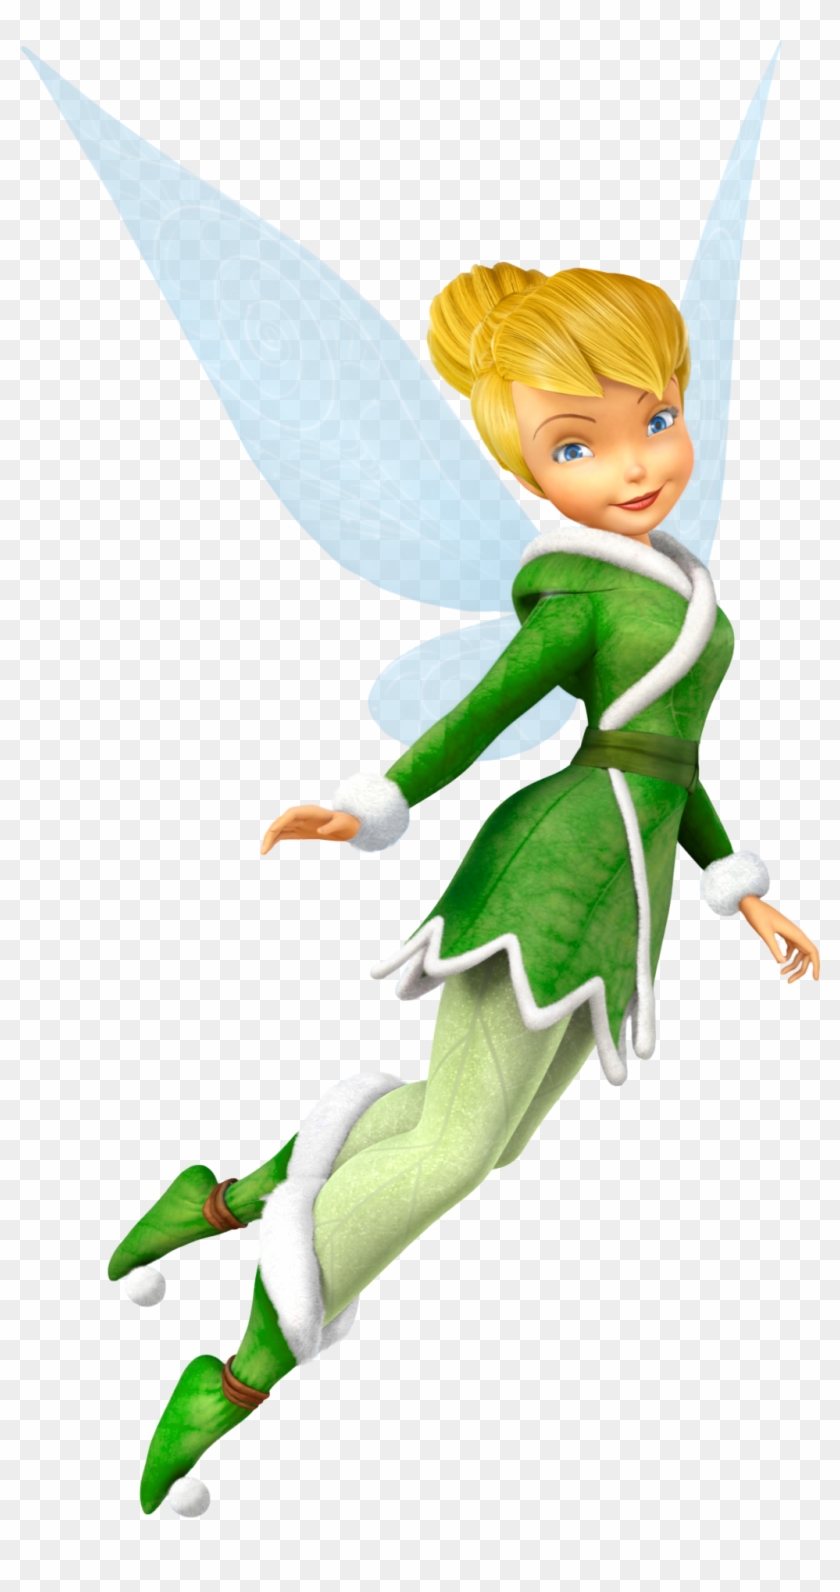 Tinkerbell - Tinkerbell Png #691777